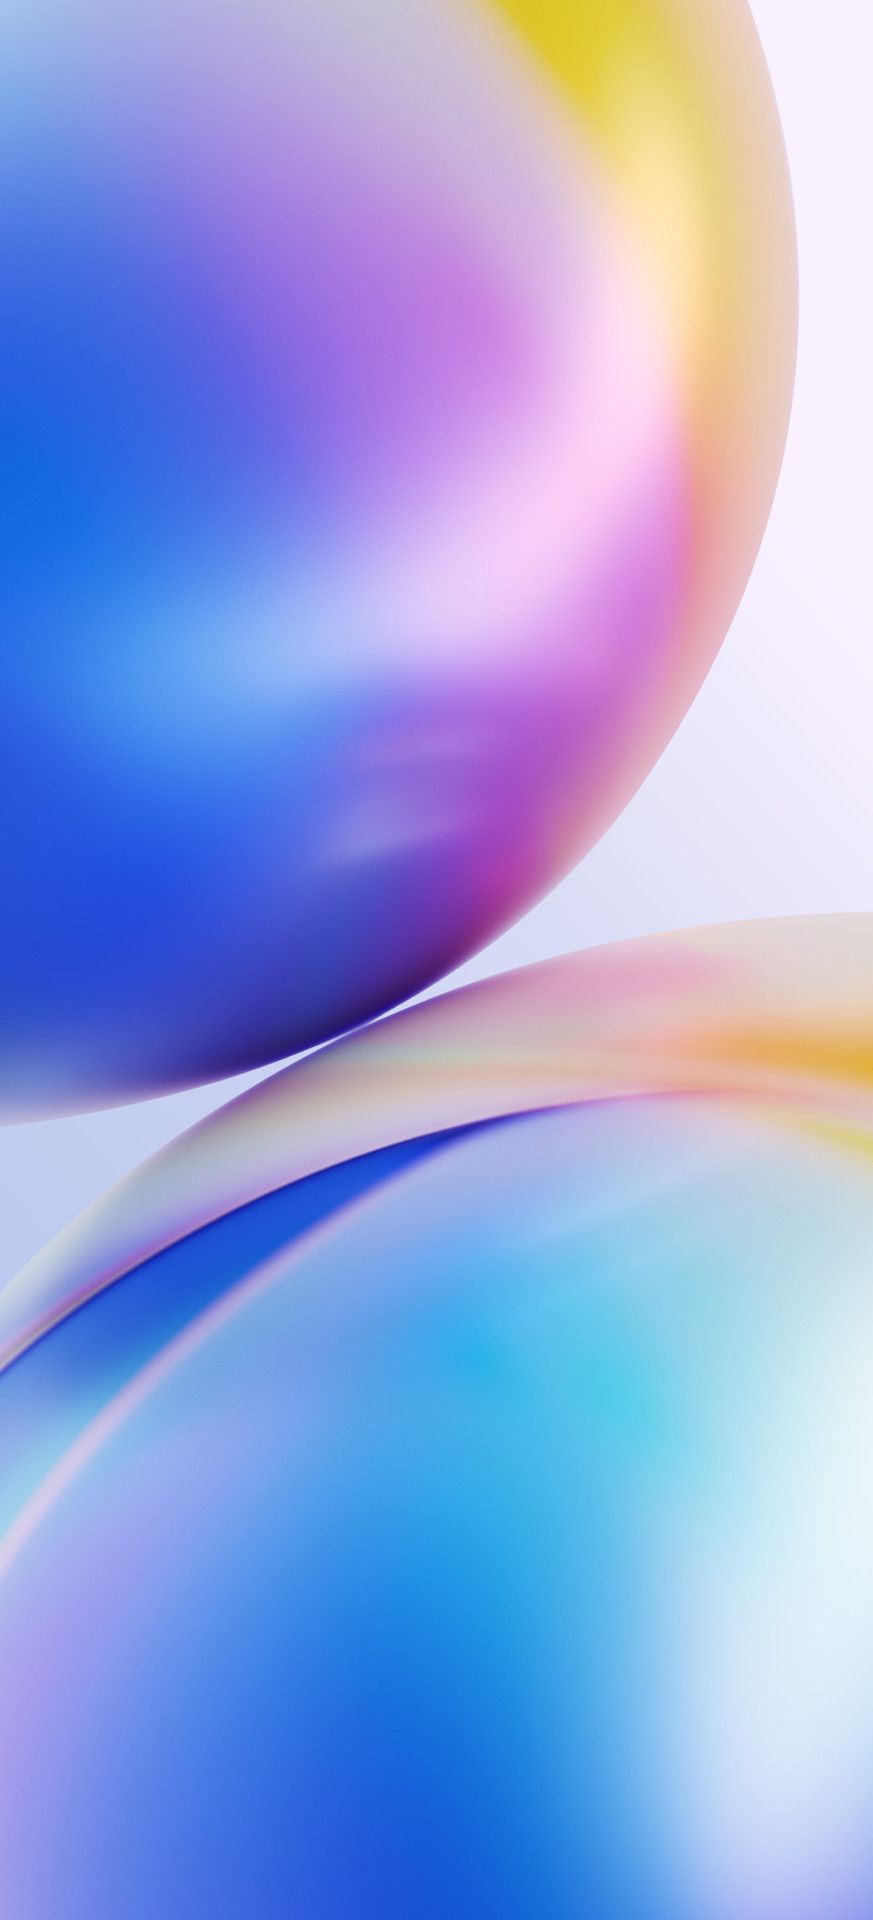 Download the OnePlus 8 official wallpaper now